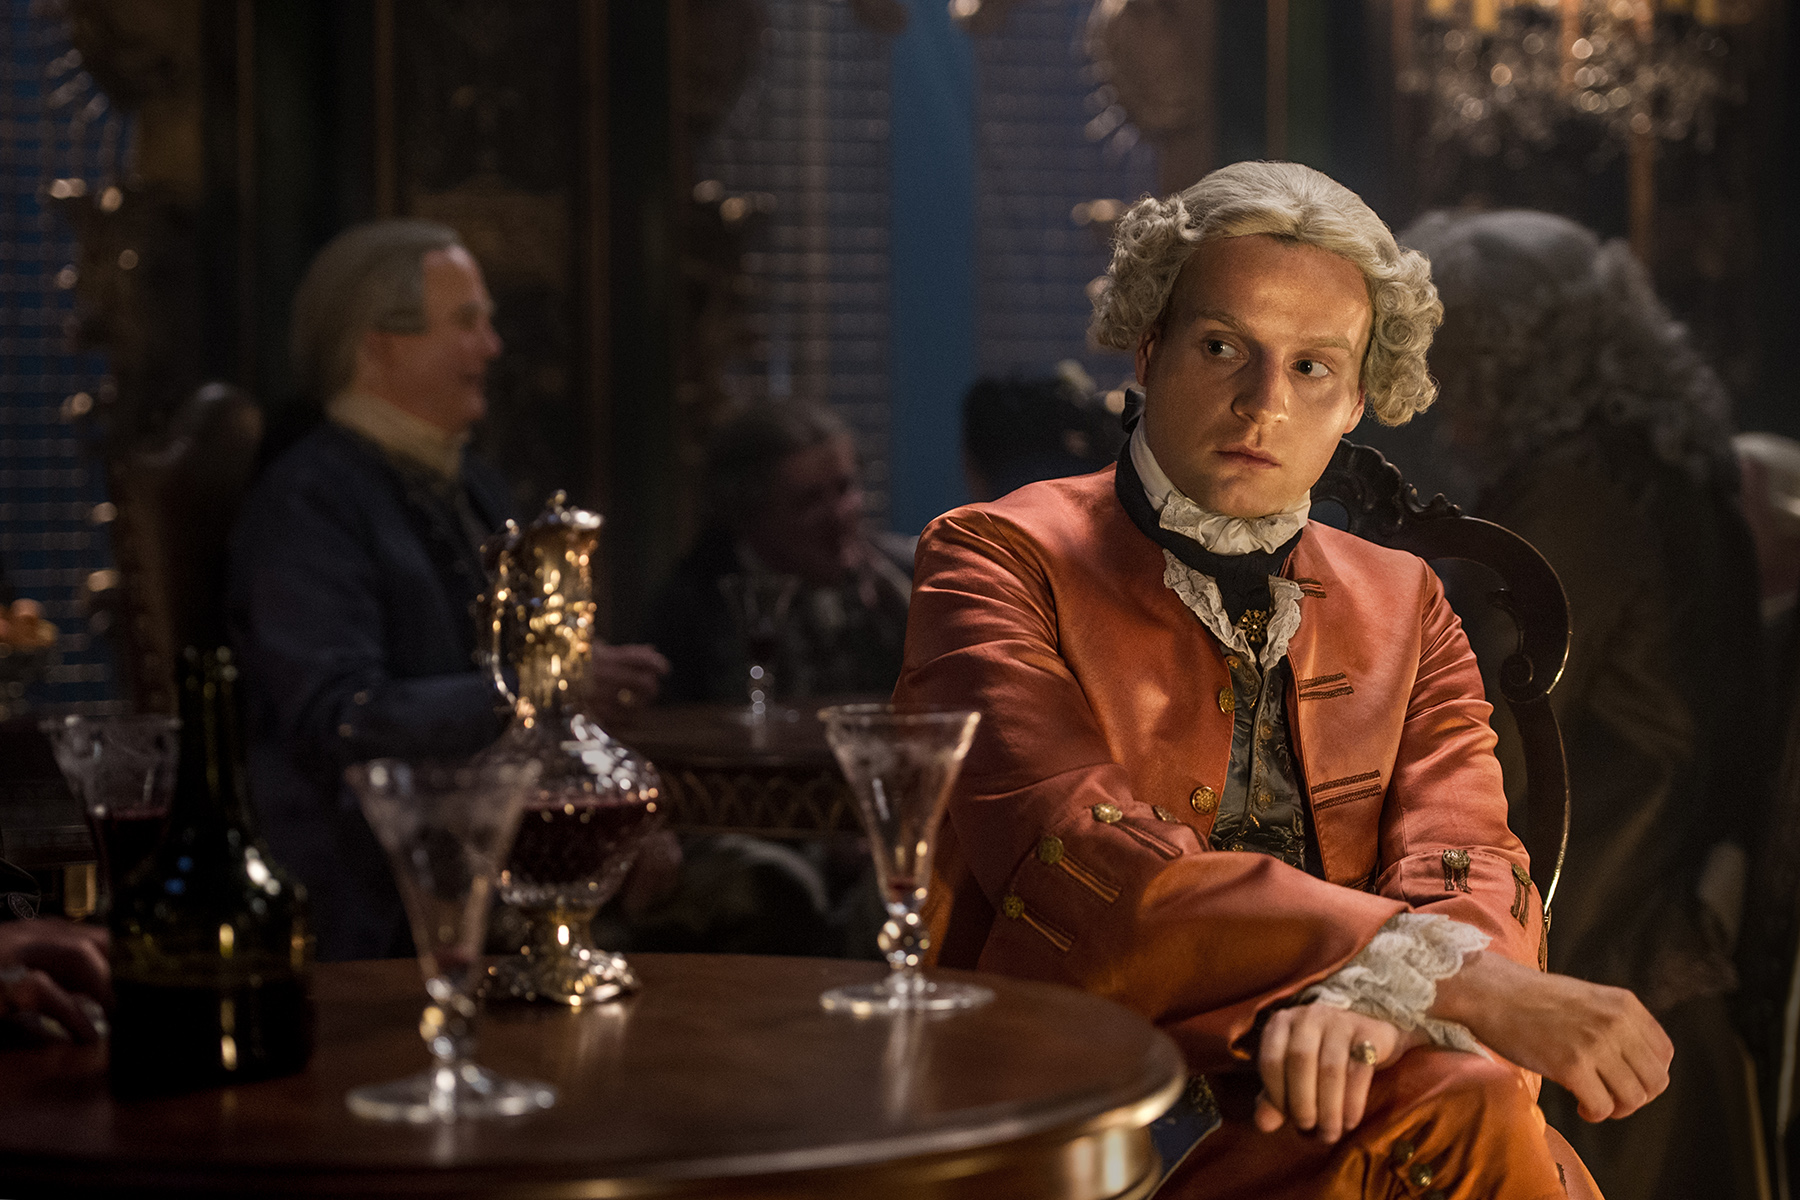 Prince Charles Stuart (Andrew Gower), not living up to Jamie and Murtagh's expectations.